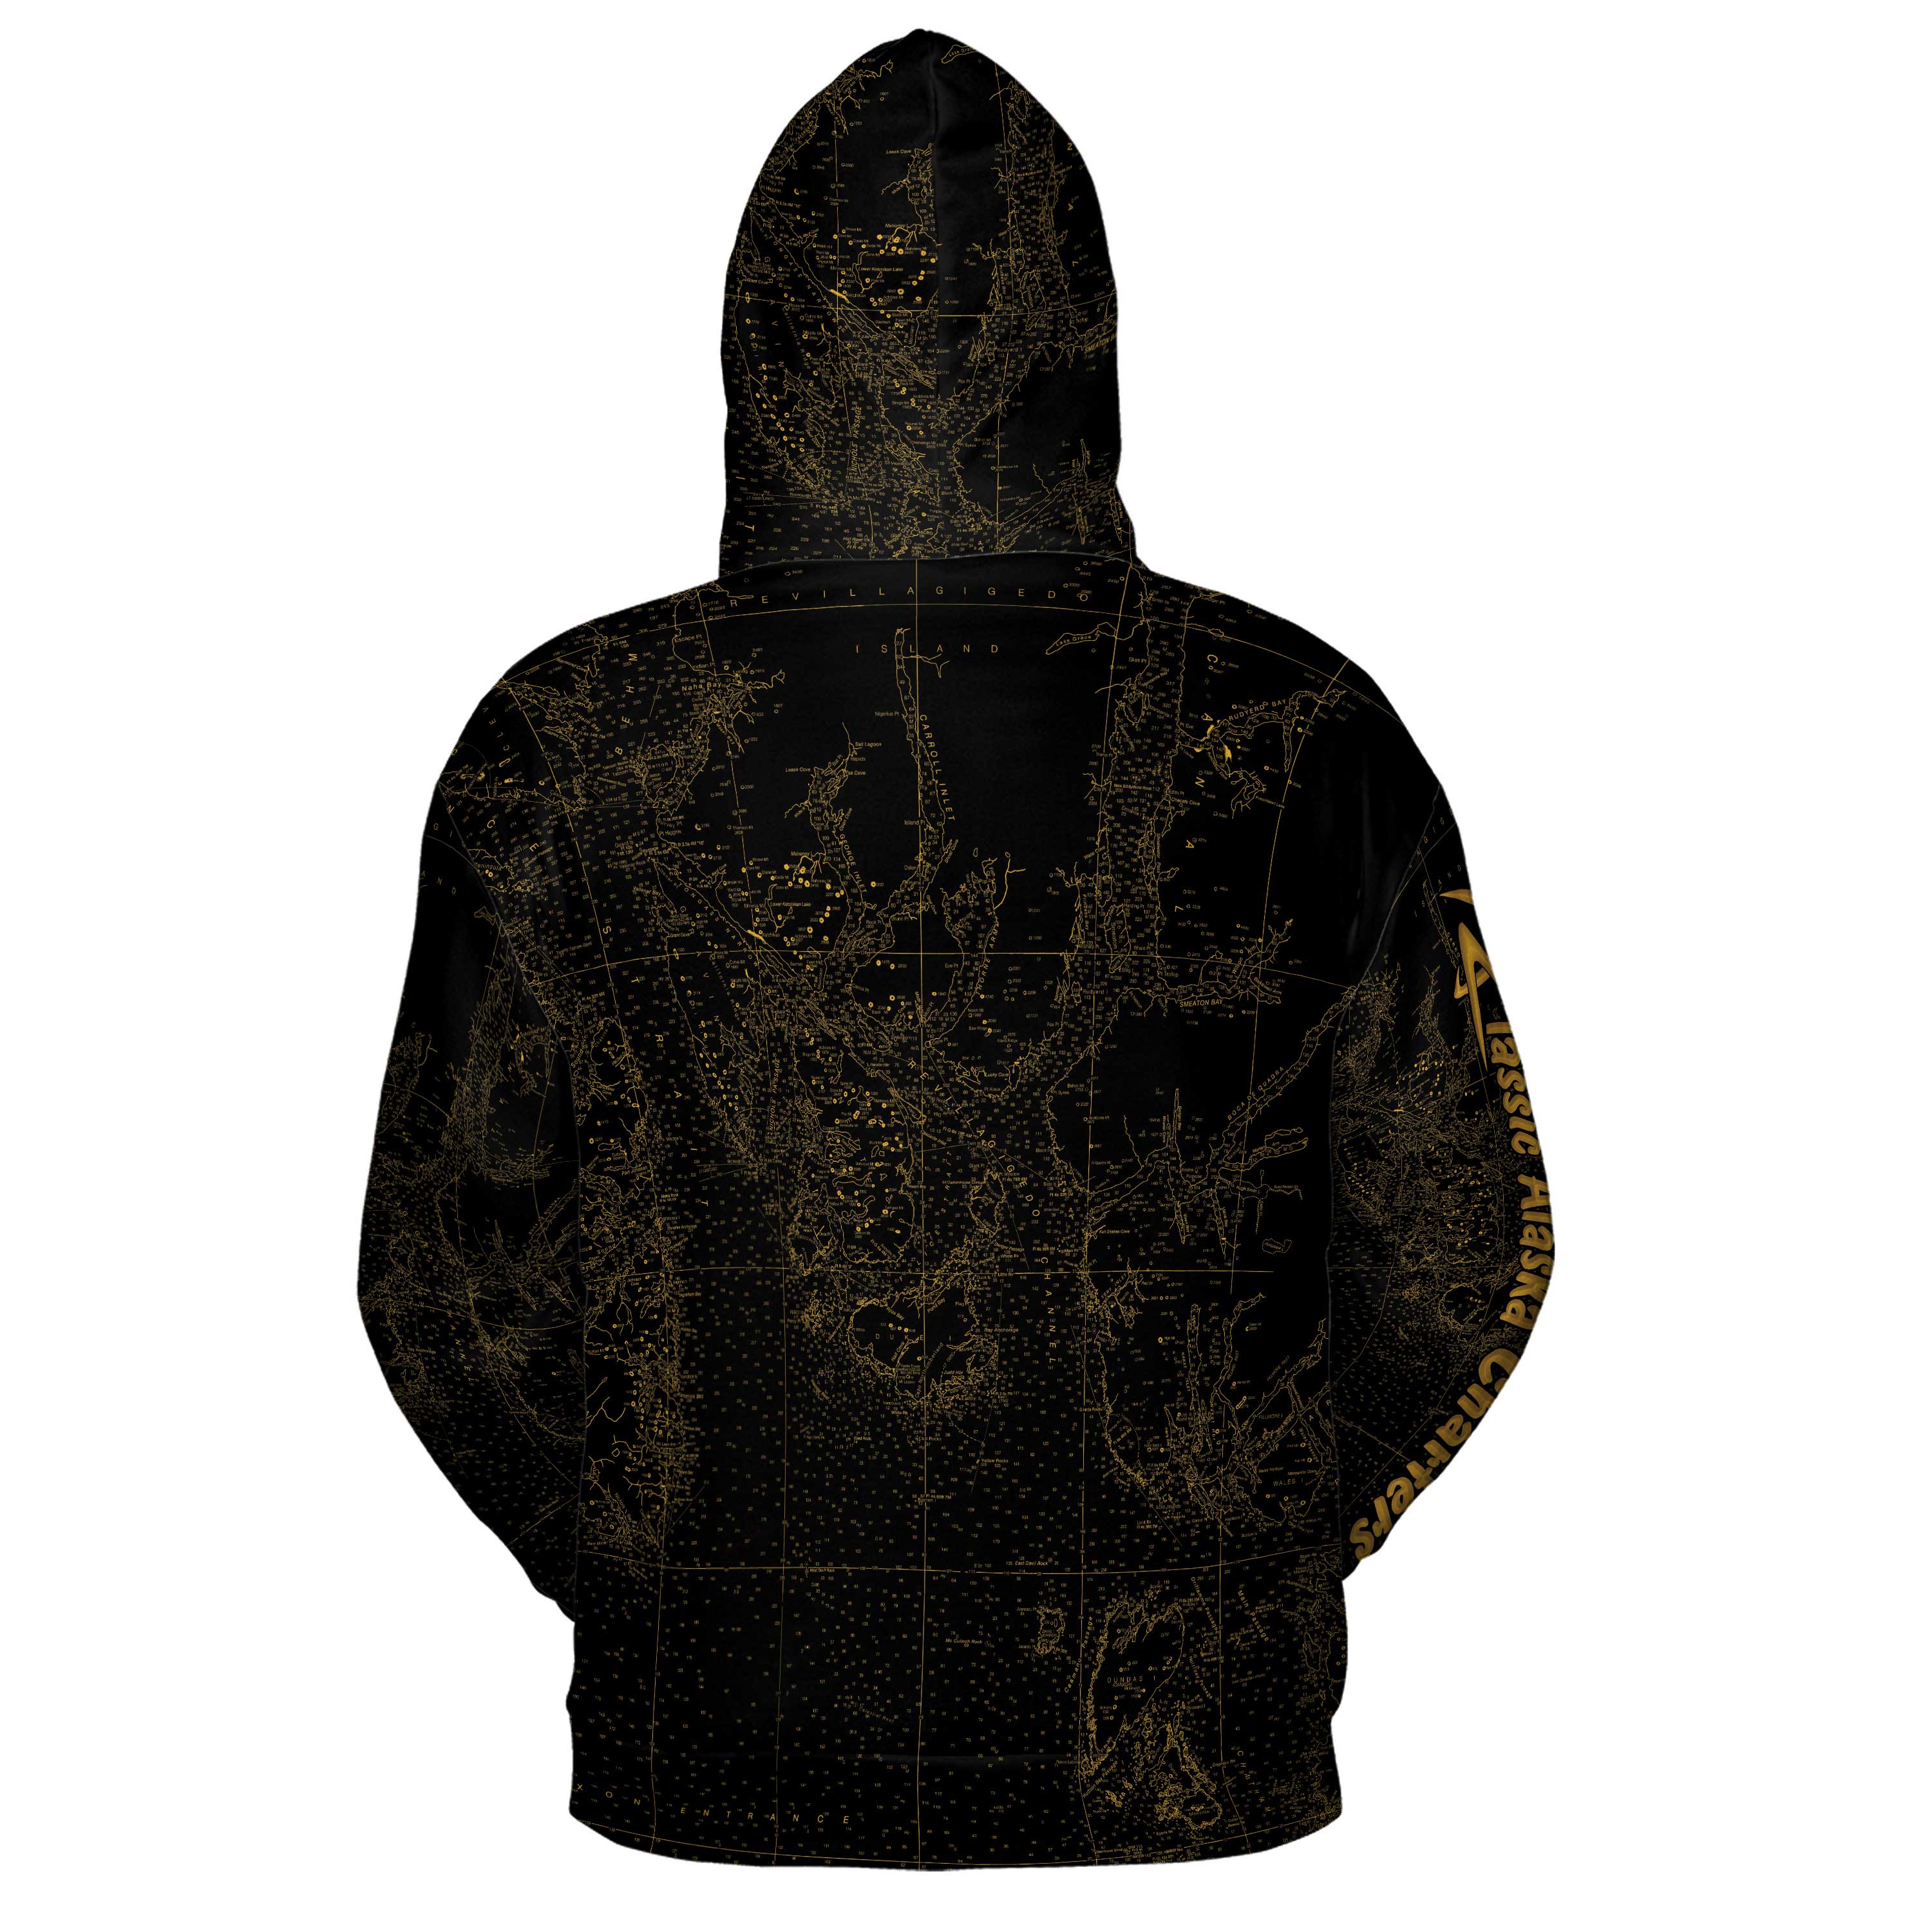 The CAC Ketchikan Midnight Gold Lightweight Hoodie